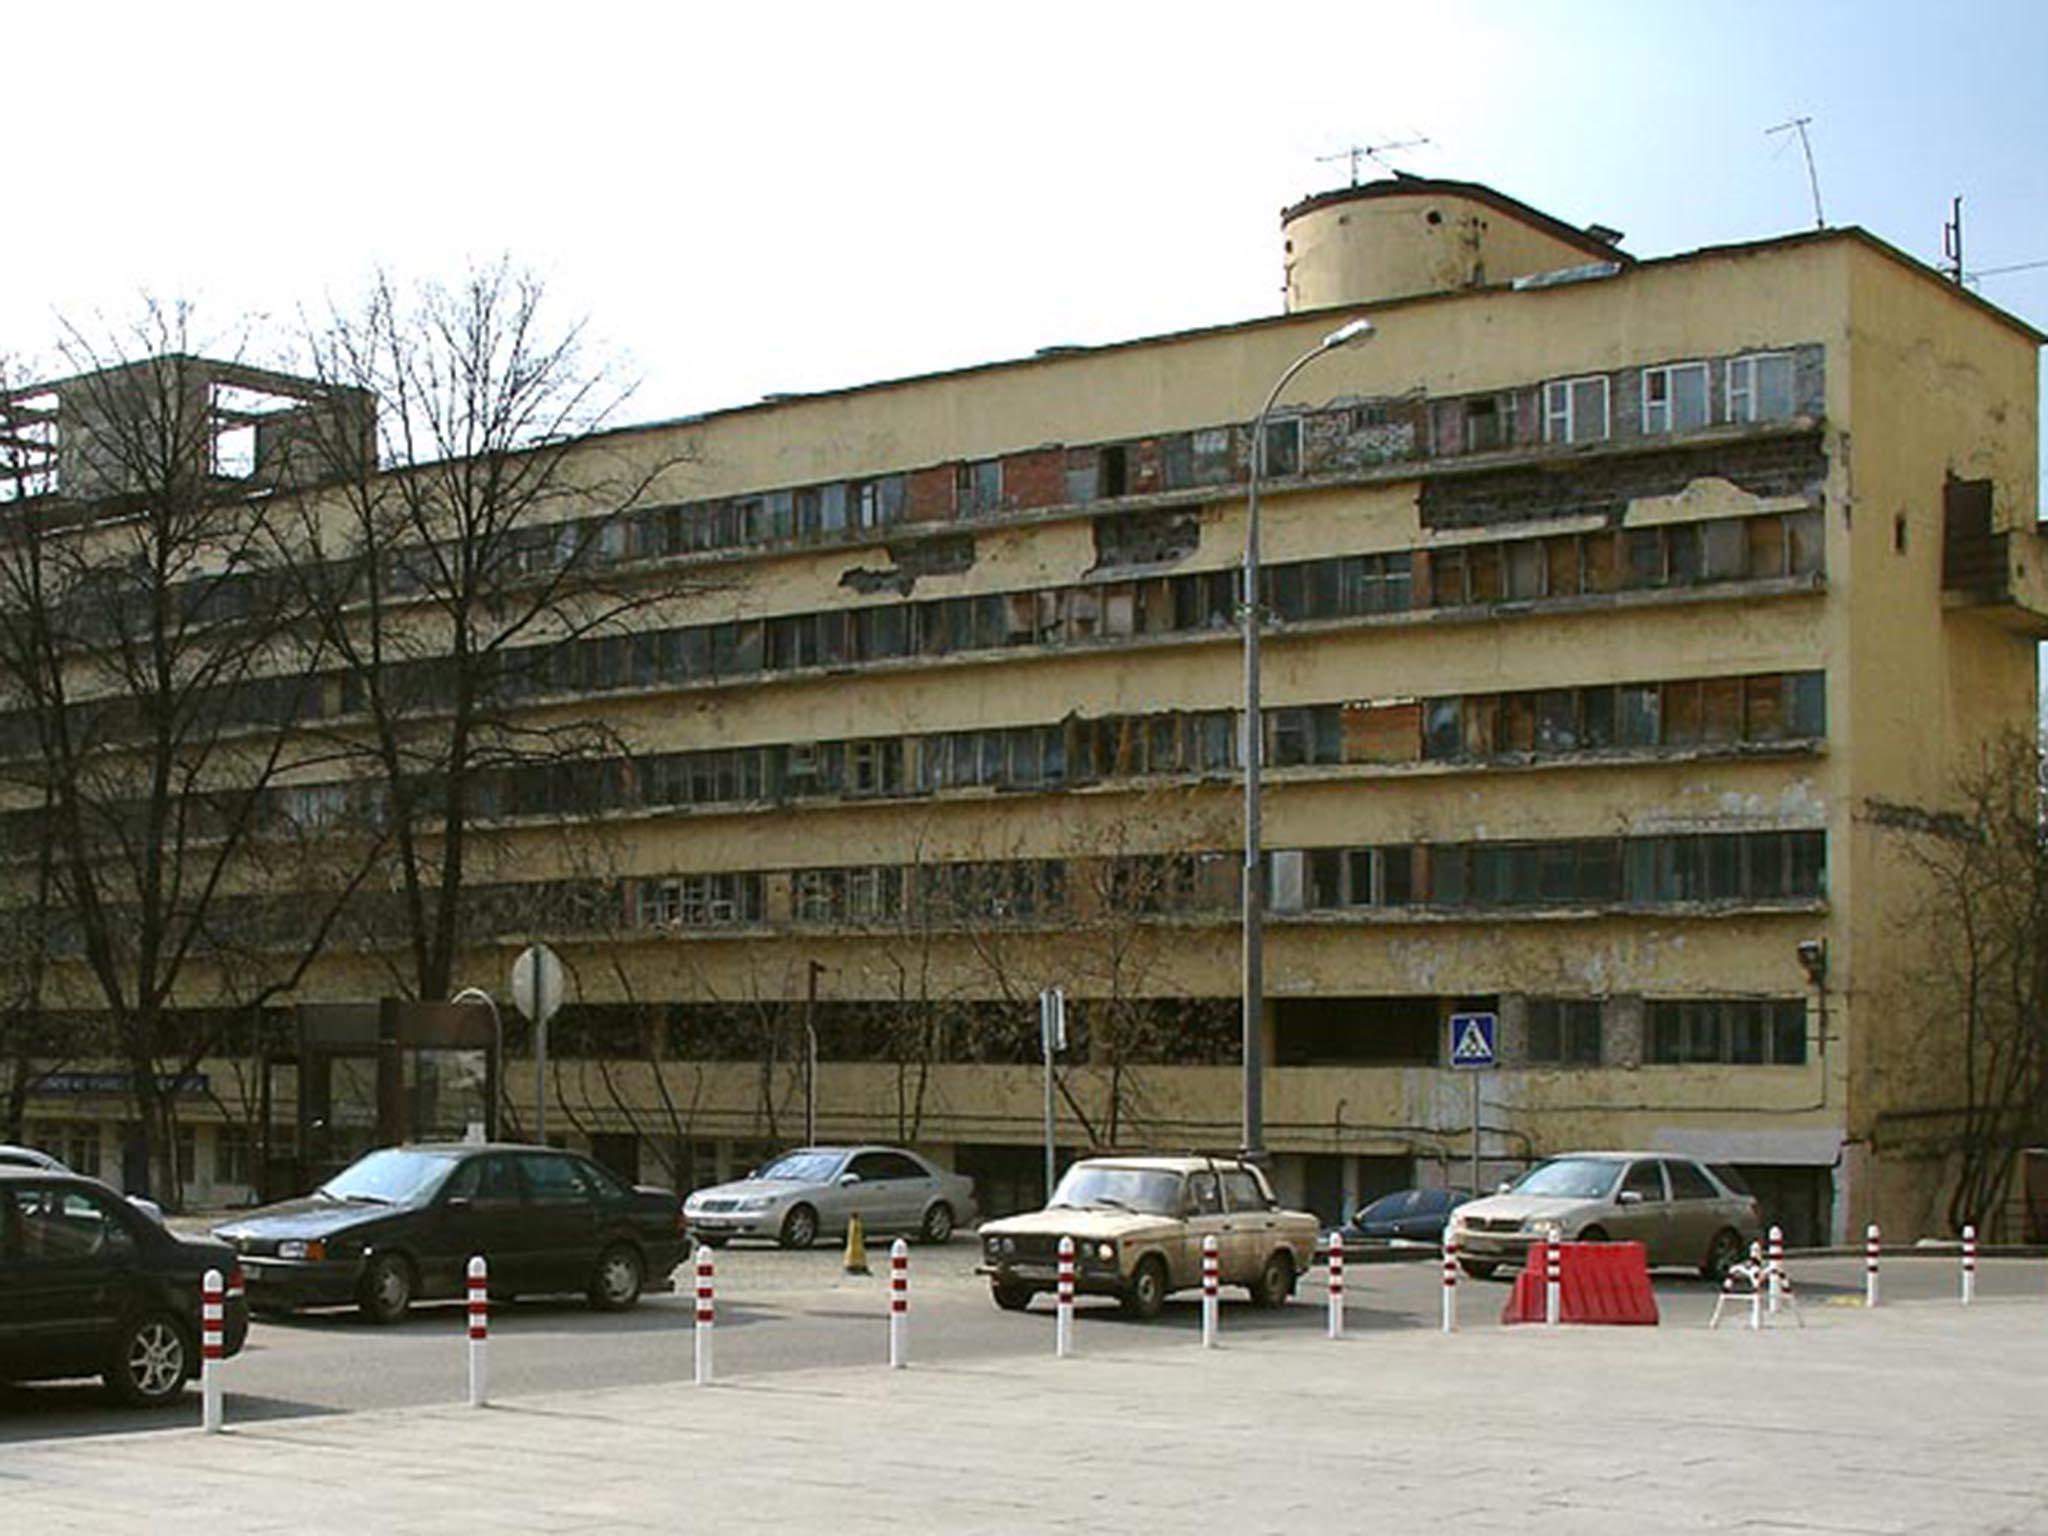 Narkomfin Communal House in Moscow